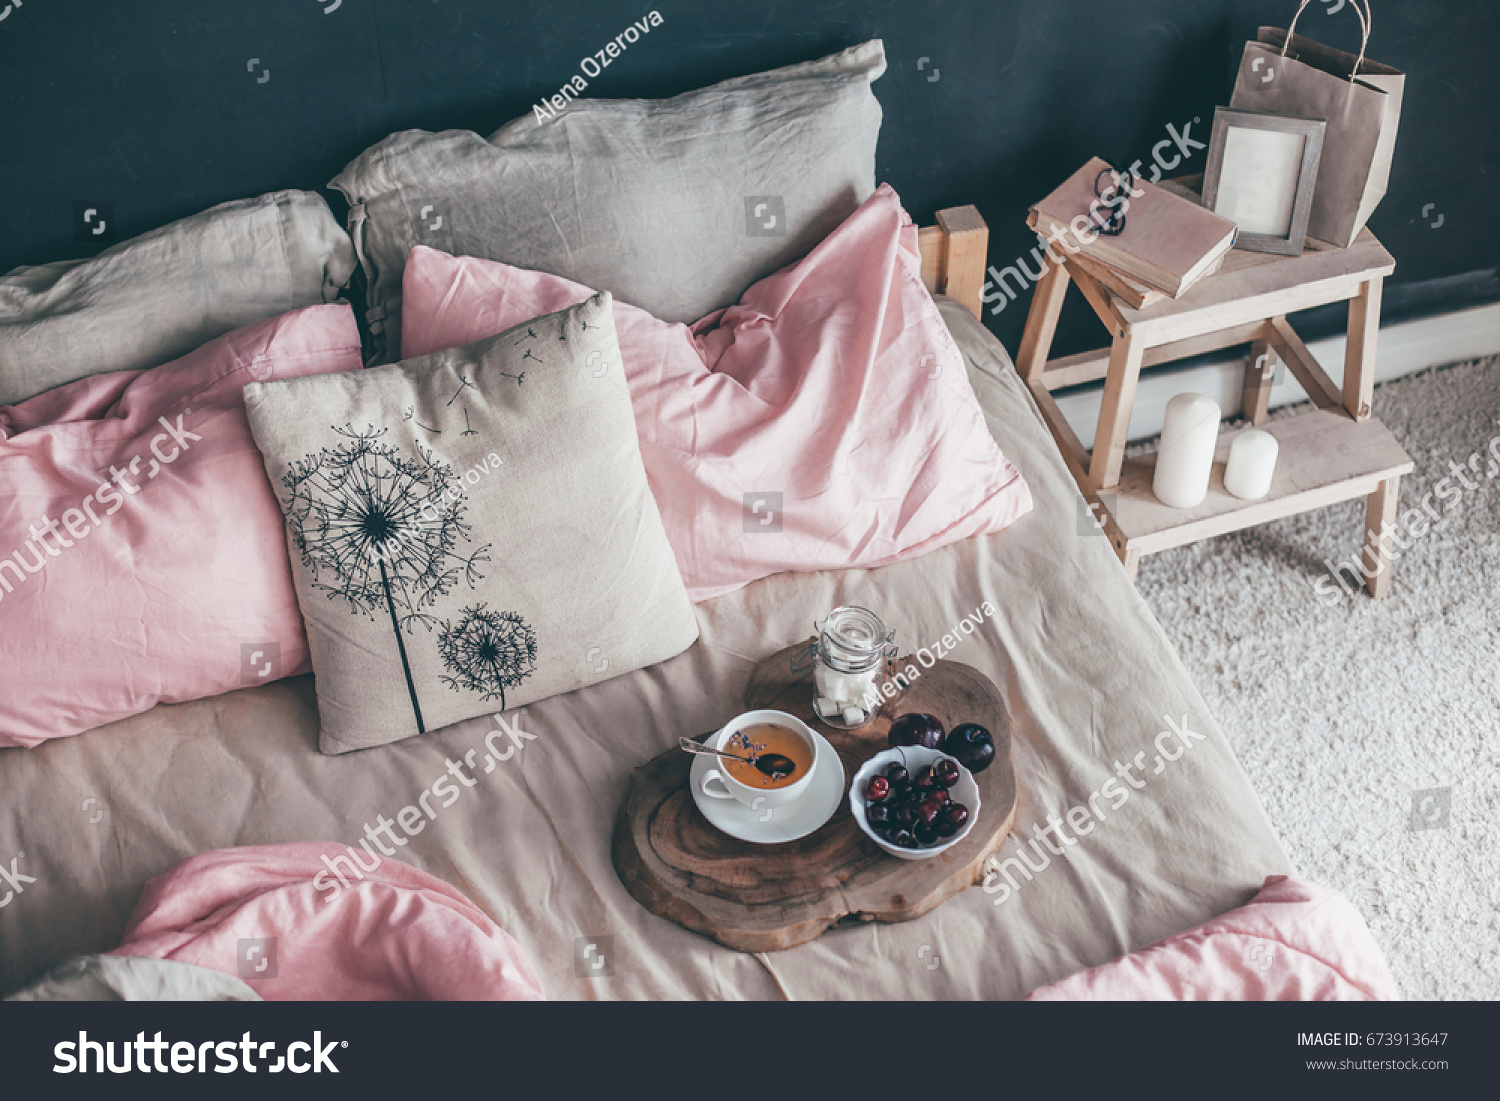 Black loft bedroom and pastel bedding set. Unmade bed with breakfast and reading on tray. Interior decor over blackboard wall. Cozy modern living space. #673913647